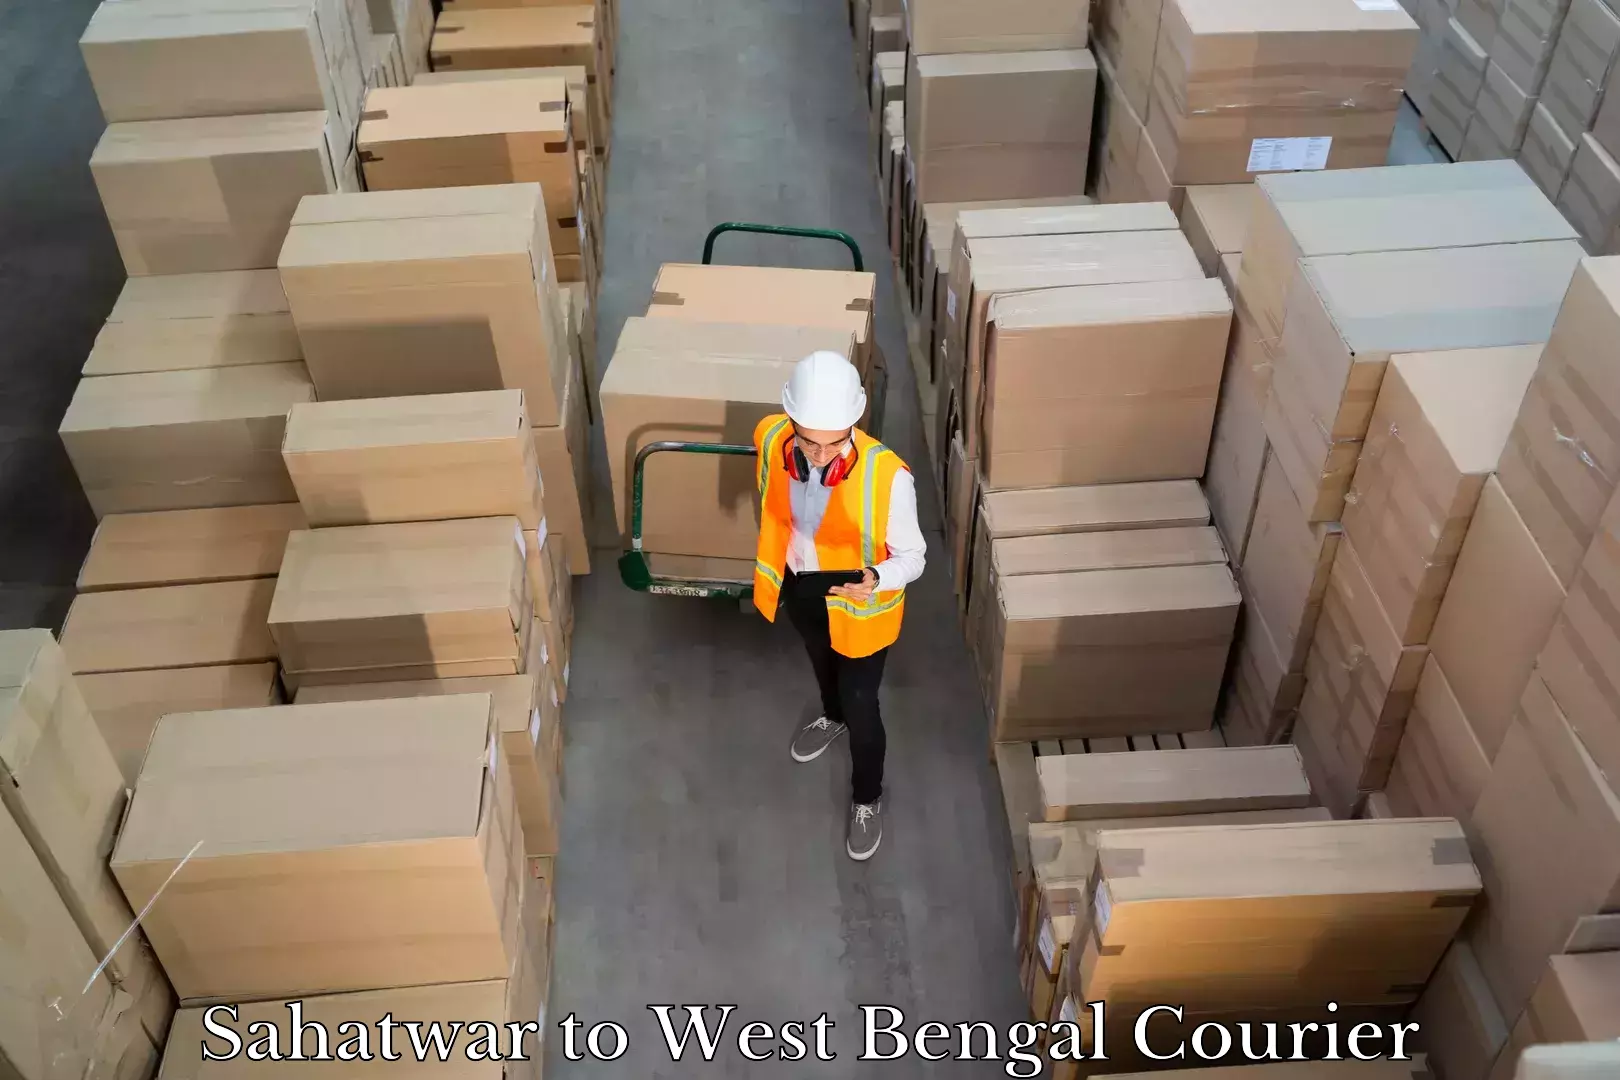 Luggage shipment specialists Sahatwar to Tollygunge